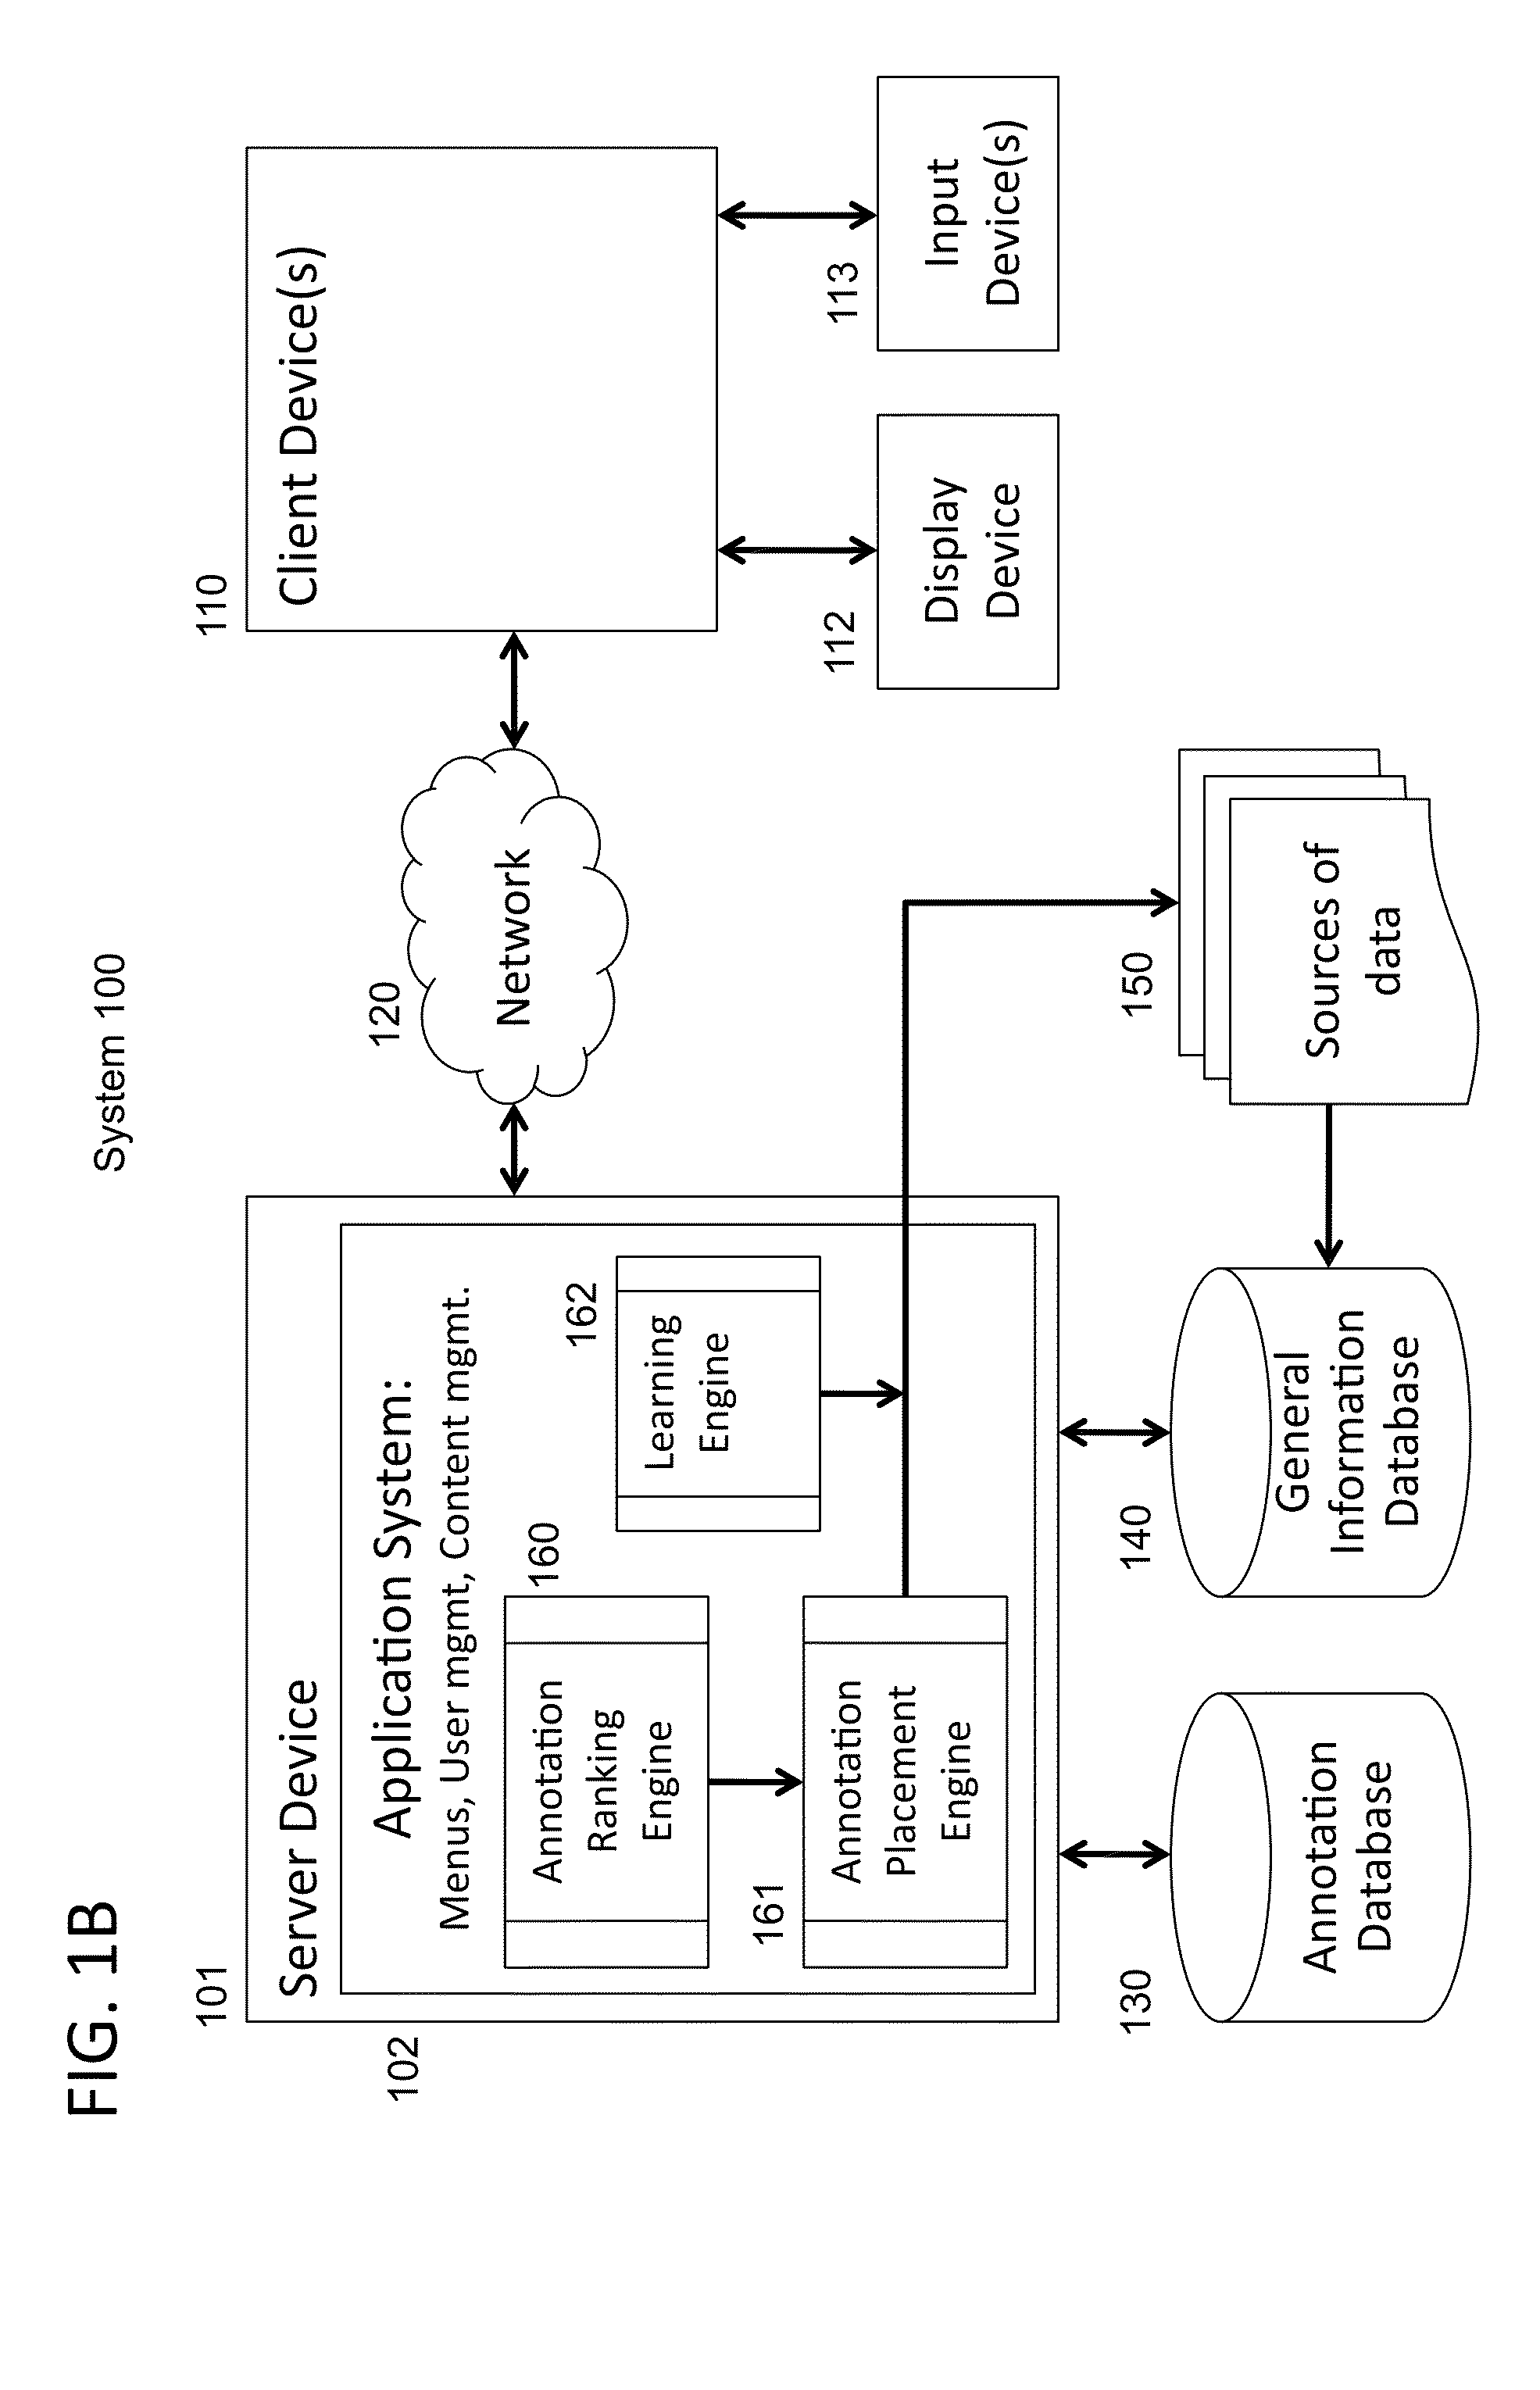 Method of annotating portions of a transactional legal document related to a merger or acquisition of a business entity with graphical display data related to current metrics in merger or acquisition transactions